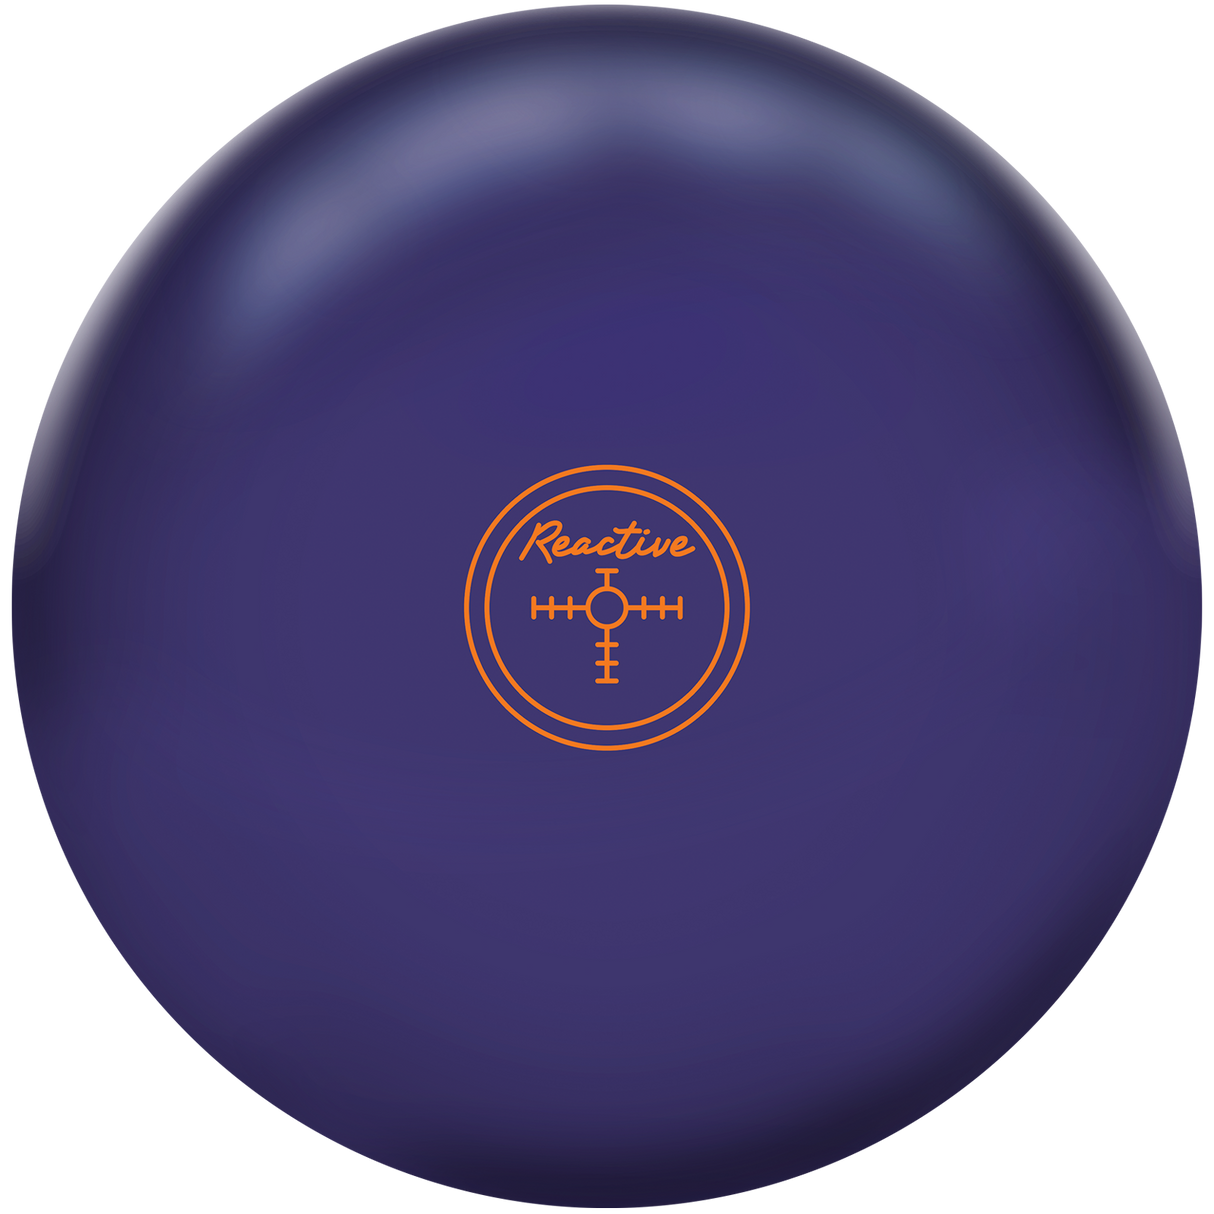 hammer-purple-solid-reactive bowling ball. Inside Bowling powered by Ray Orf's Pro Shop in St. Louis, Missouri USA best prices online. Free shipping on orders over $75.